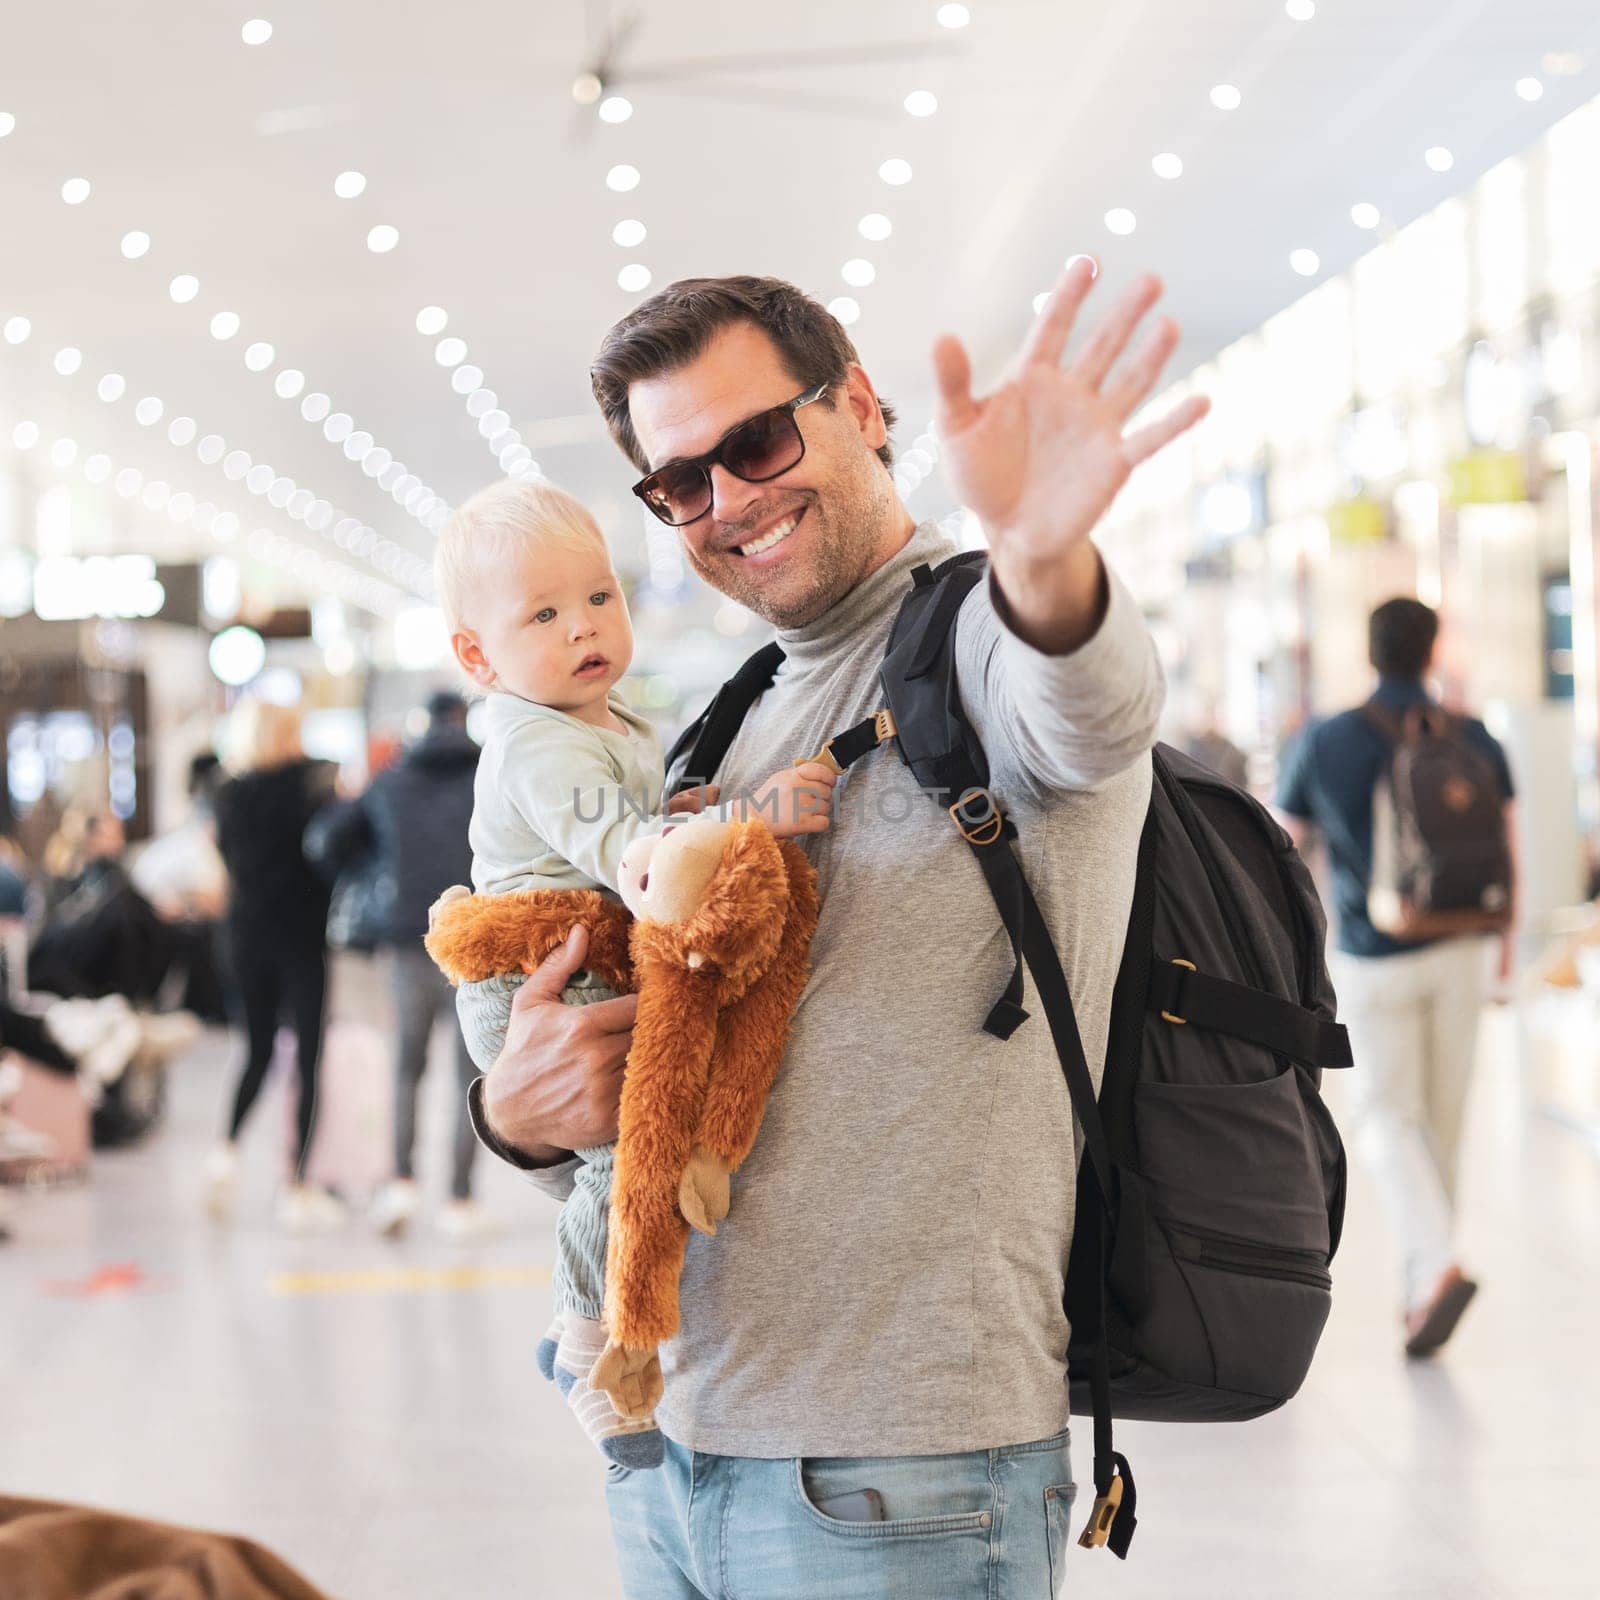 Father traveling with child, holding his infant baby boy at airport terminal waiting to board a plane waving goodby. Travel with kids concept. by kasto